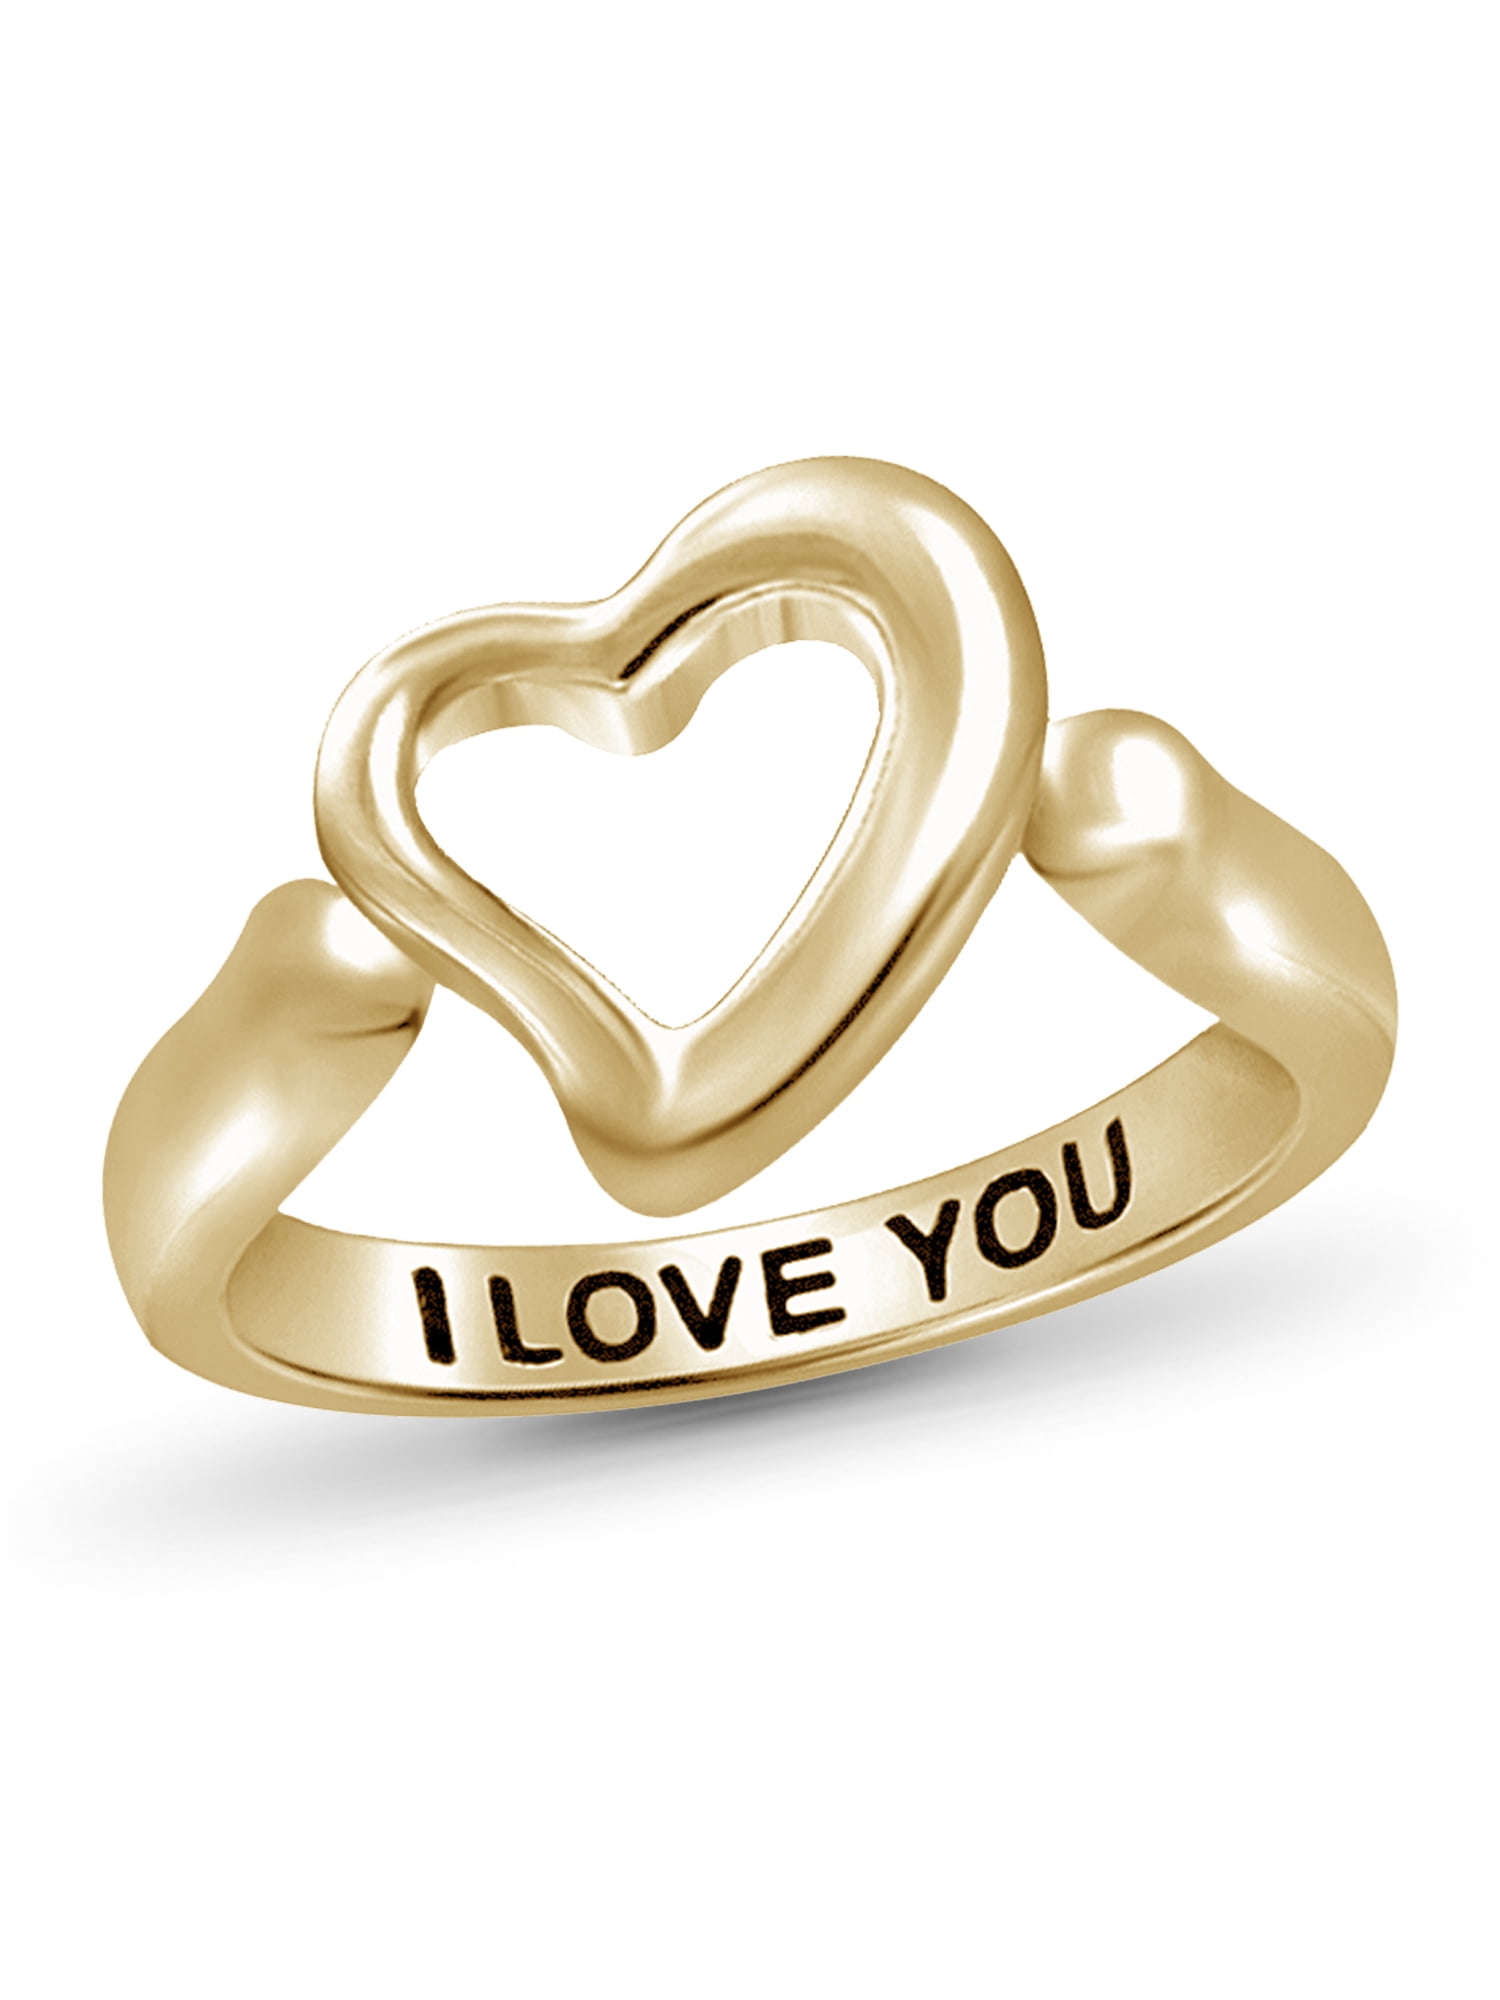 Amazon.com: Bellblow Personalized Name Rings with Heart Symbol, Custom Name  Ring 18K Gold Plated, Customized Jewelry Gifts for Women Men Girls :  Handmade Products